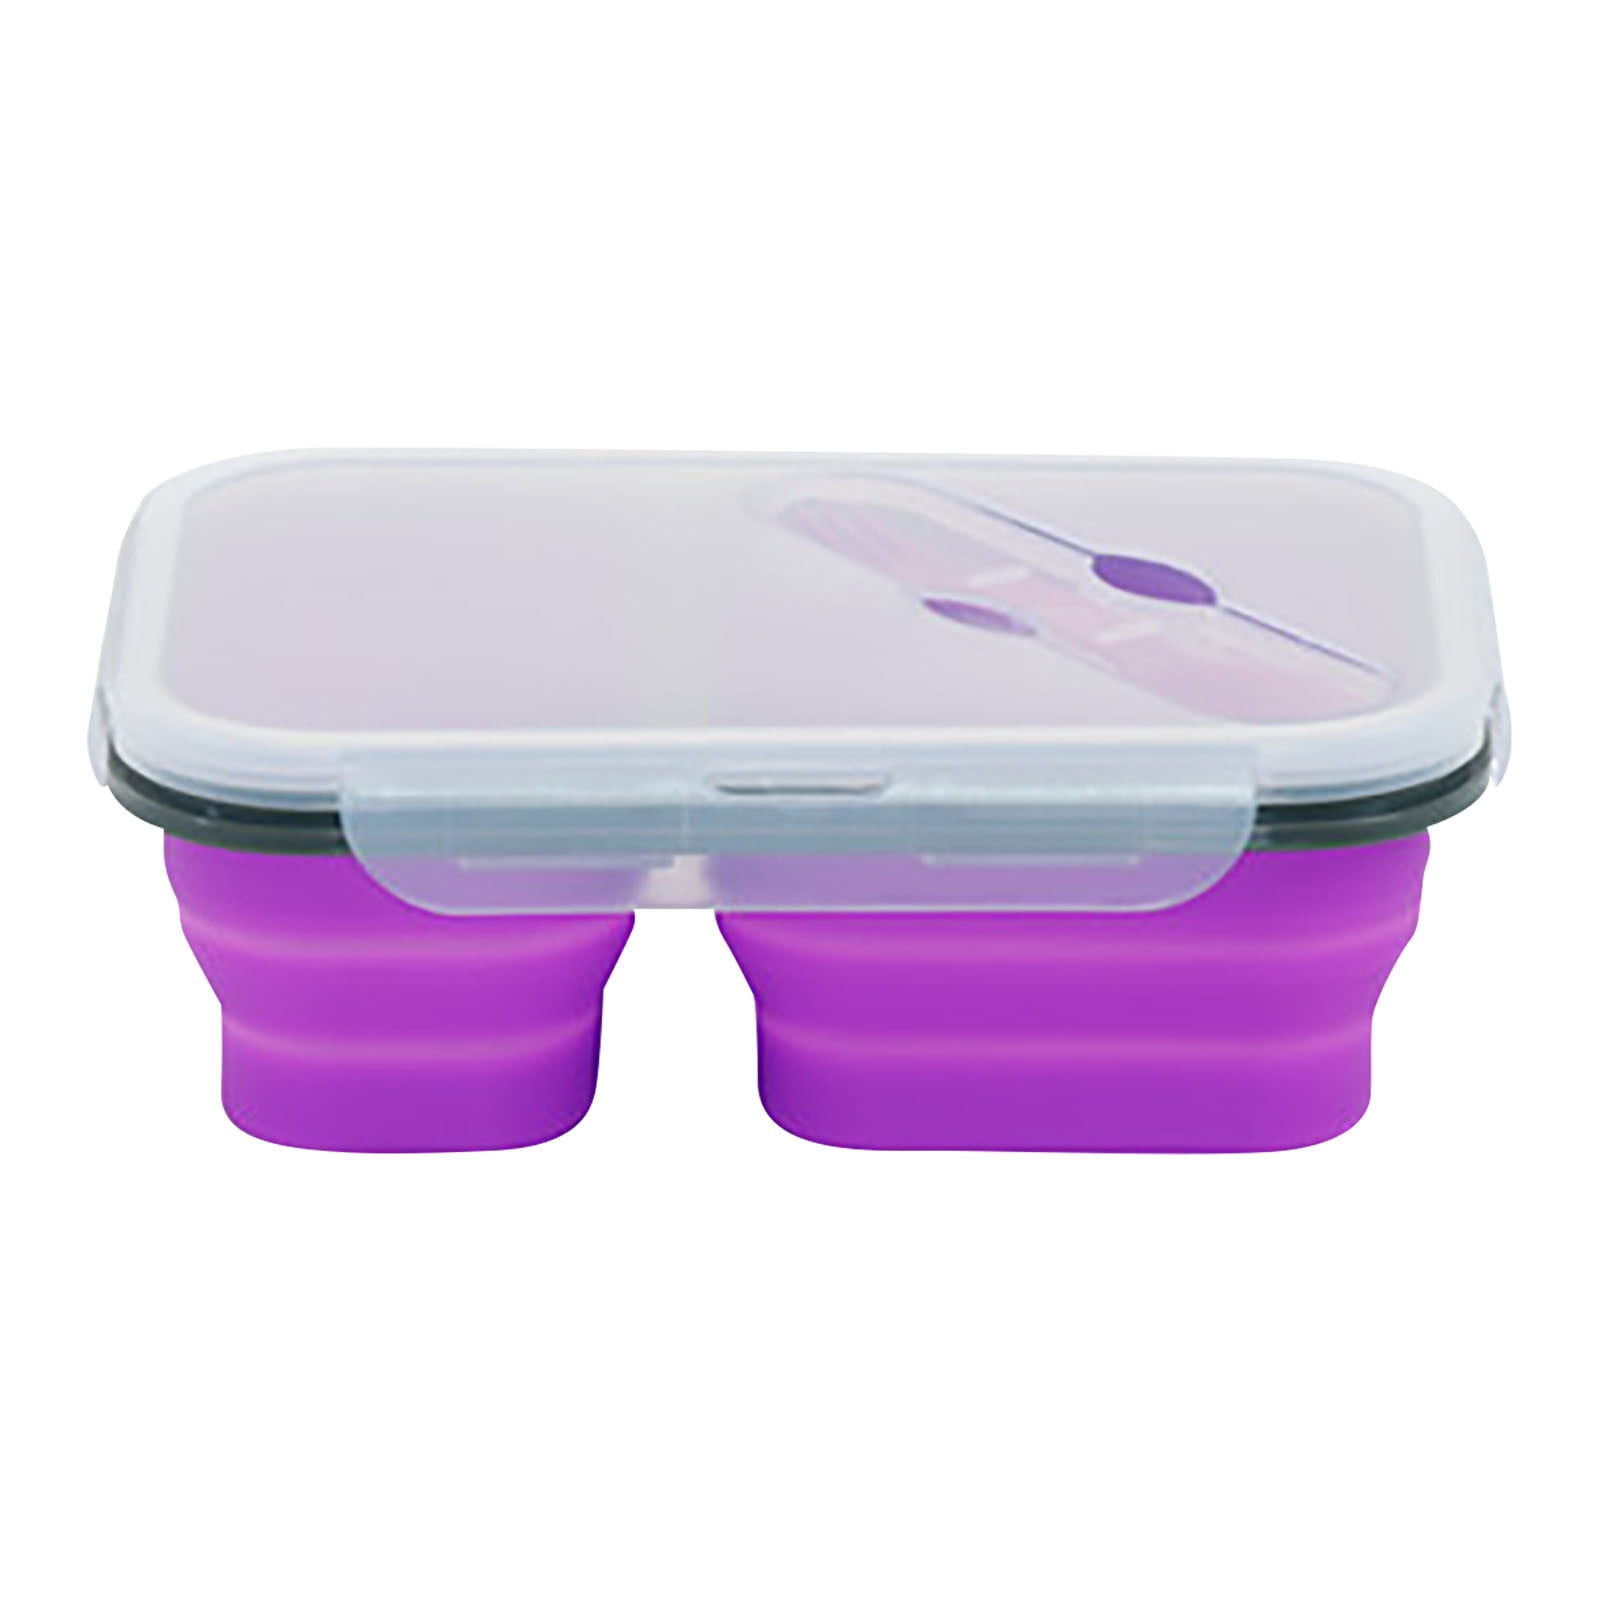 XMMSWDLA Collapsible Bento Box, Lunch Box 2 Compartment, Premium Silicone,  , Airtight Snap-Top Lid, Microwave and Dishwasher Safe,with Spoon 